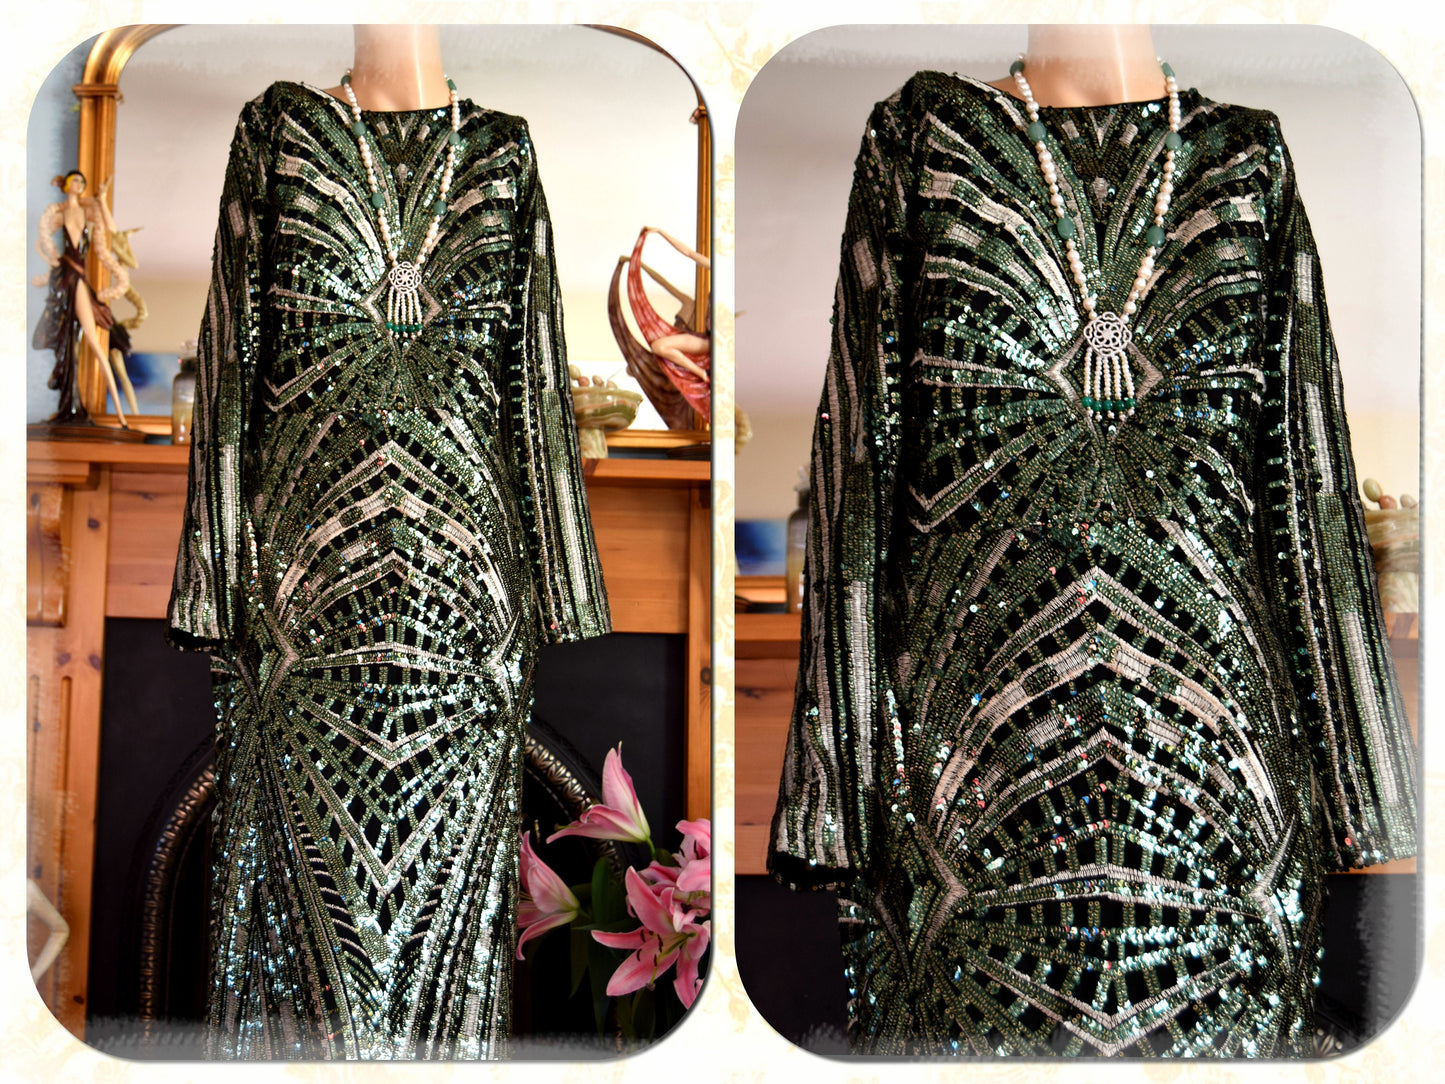 Vintage beaded Sequinned Embroidered Green Black Statement dress flapper Downton Abbey 1920s Marlene Dietrich Maxi dress UK size 8 10 US 4 6